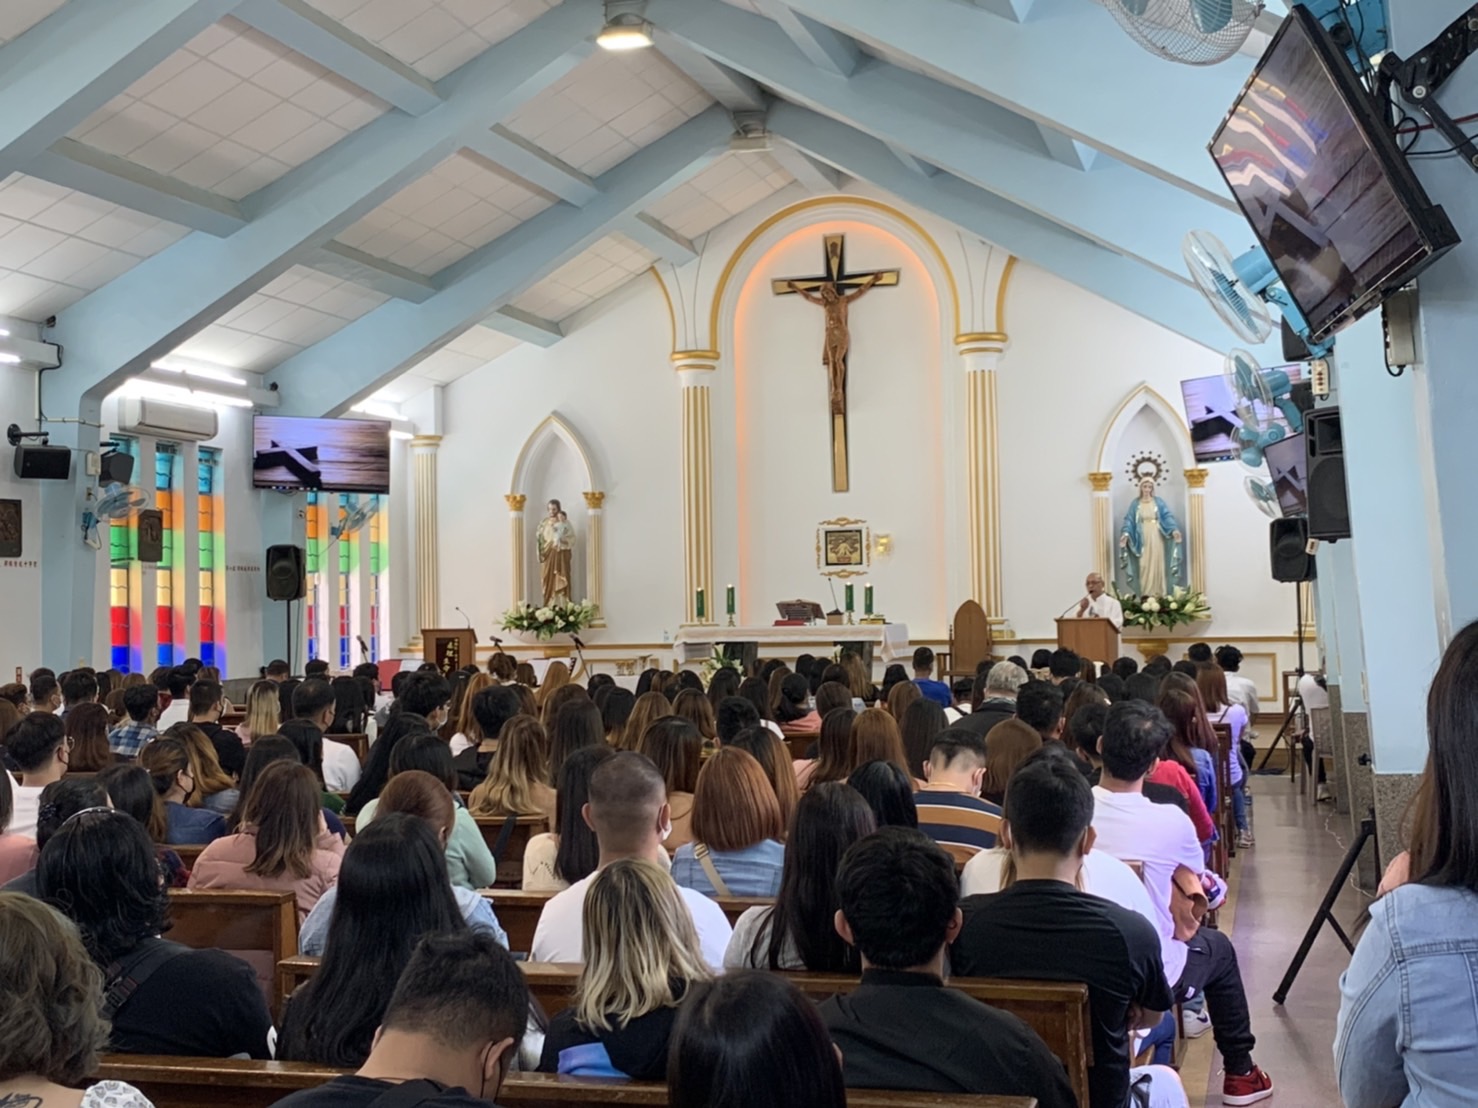 Around 300 Filipinos joined the gathering at Taichung’s Our Lady of Immaculate Conception church on February 26, 2022. (Photo by Gino Lopez)